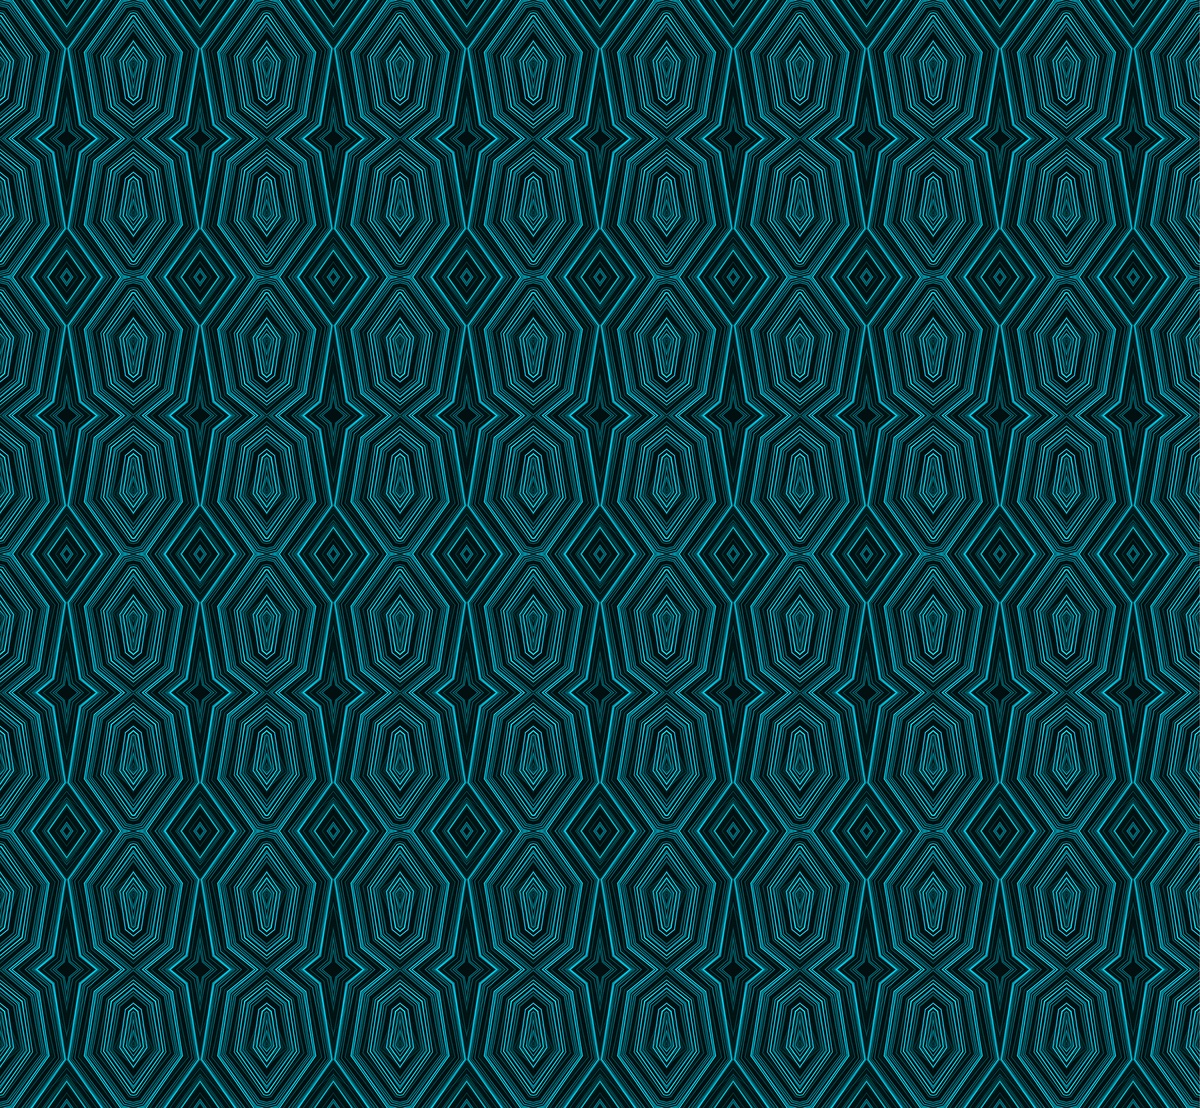 Keyhole pattern in black and blue